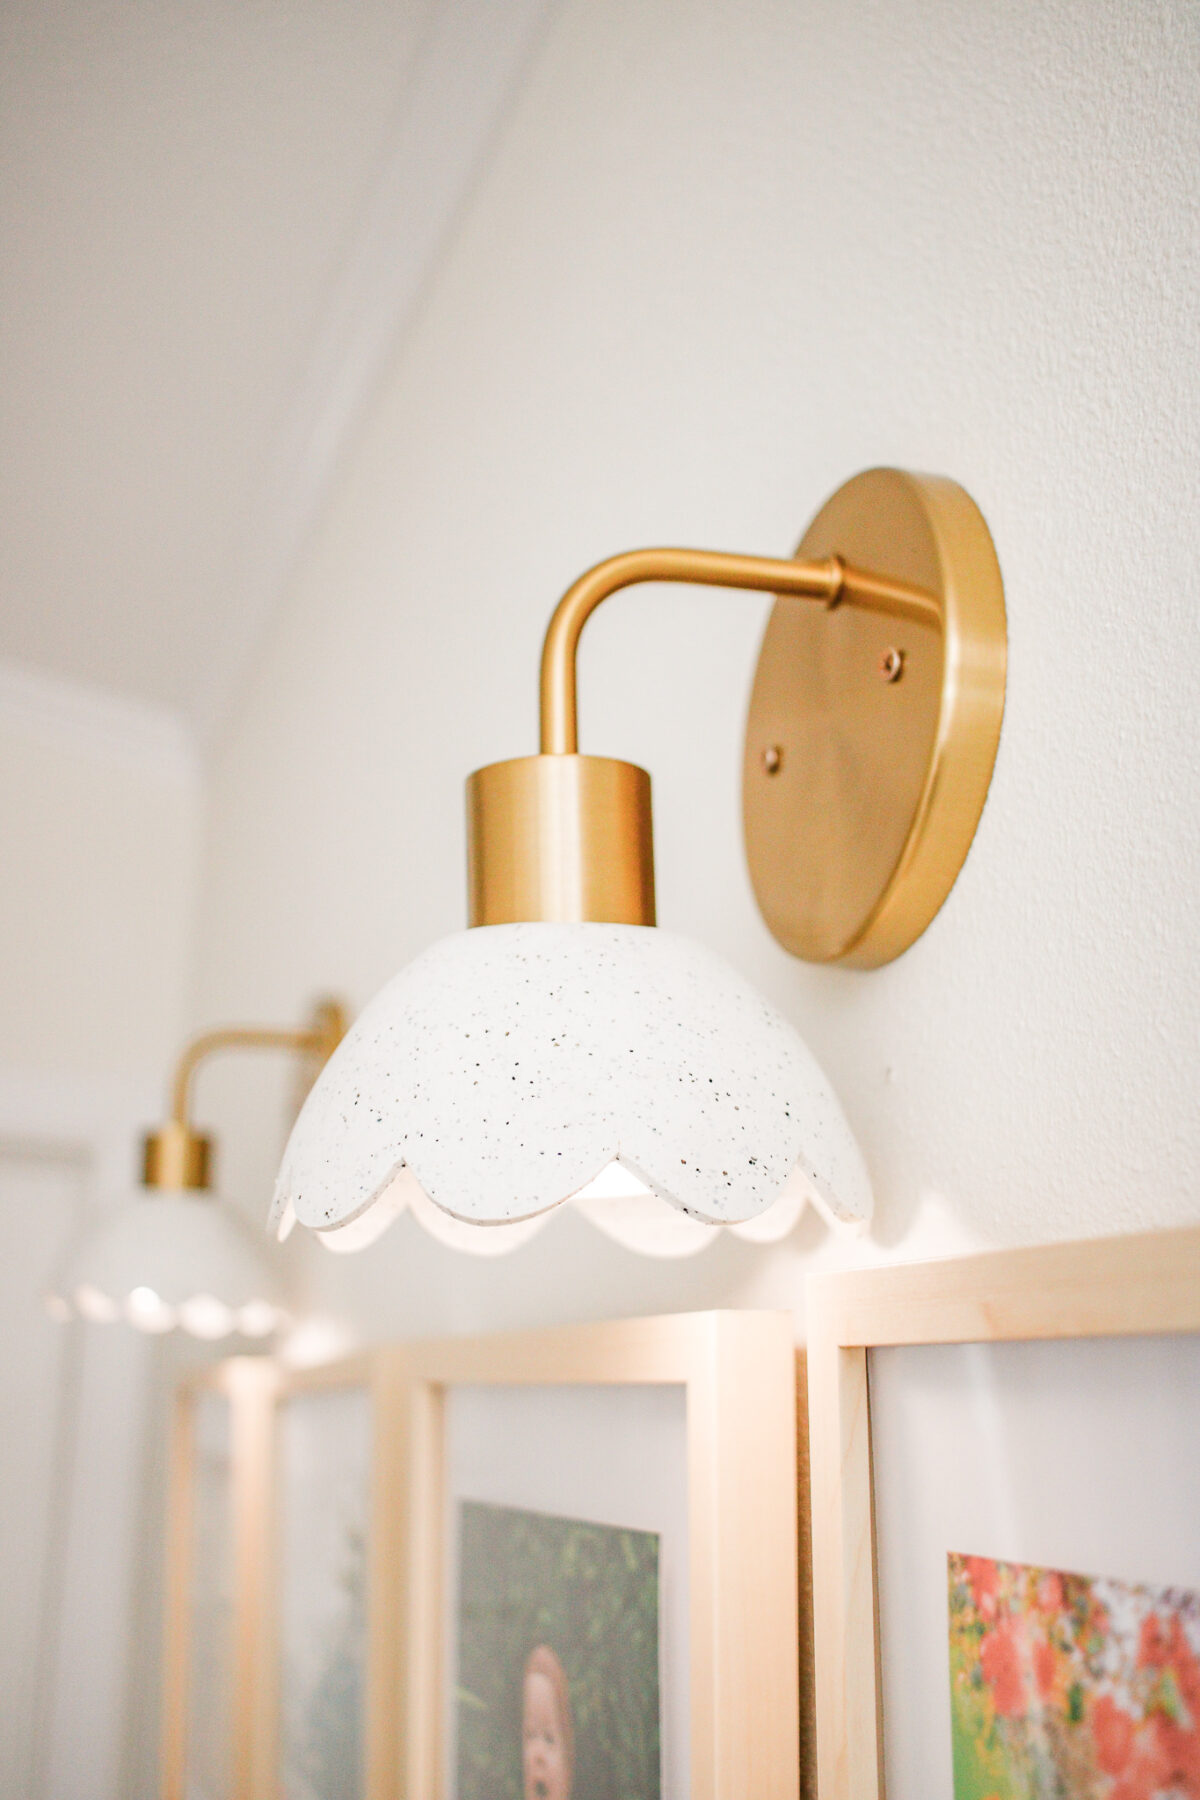 DIY Wireless Clay Wall Sconce Light For $25